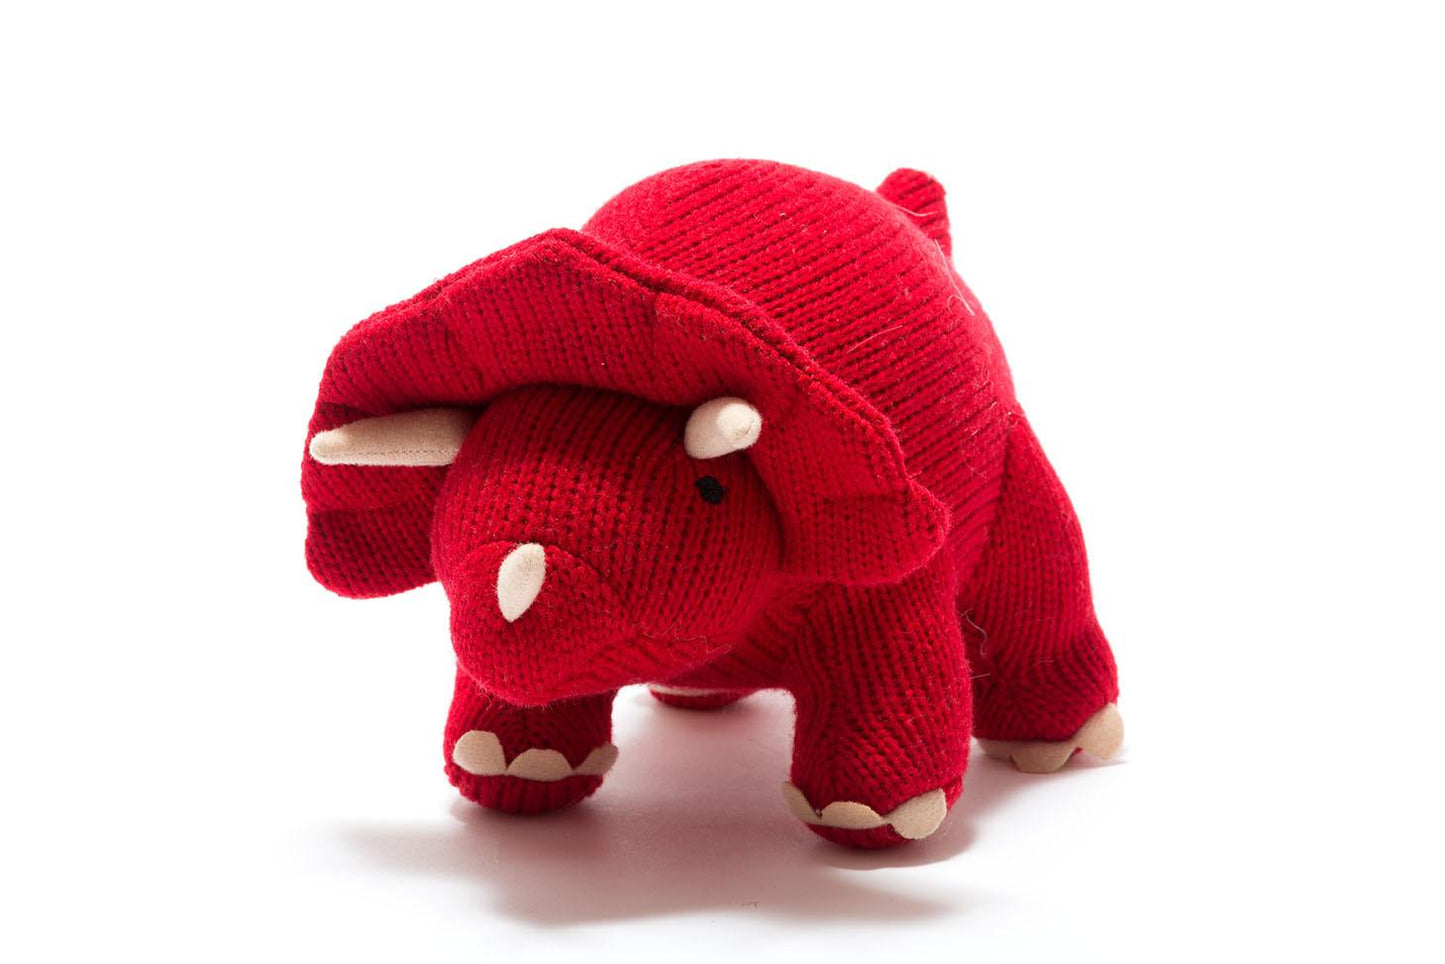 Knitted Red Triceratops